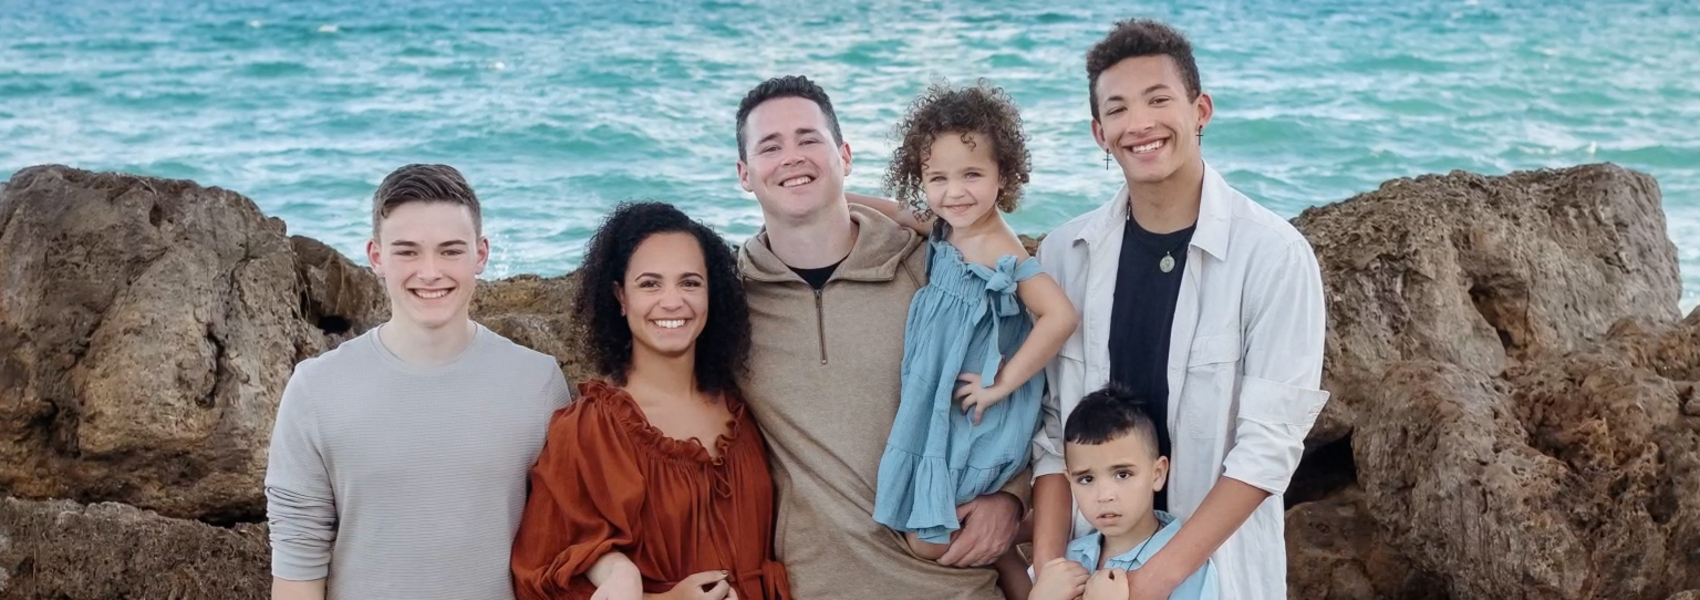 diverse family with teenagers adopted from foster care pose at beach